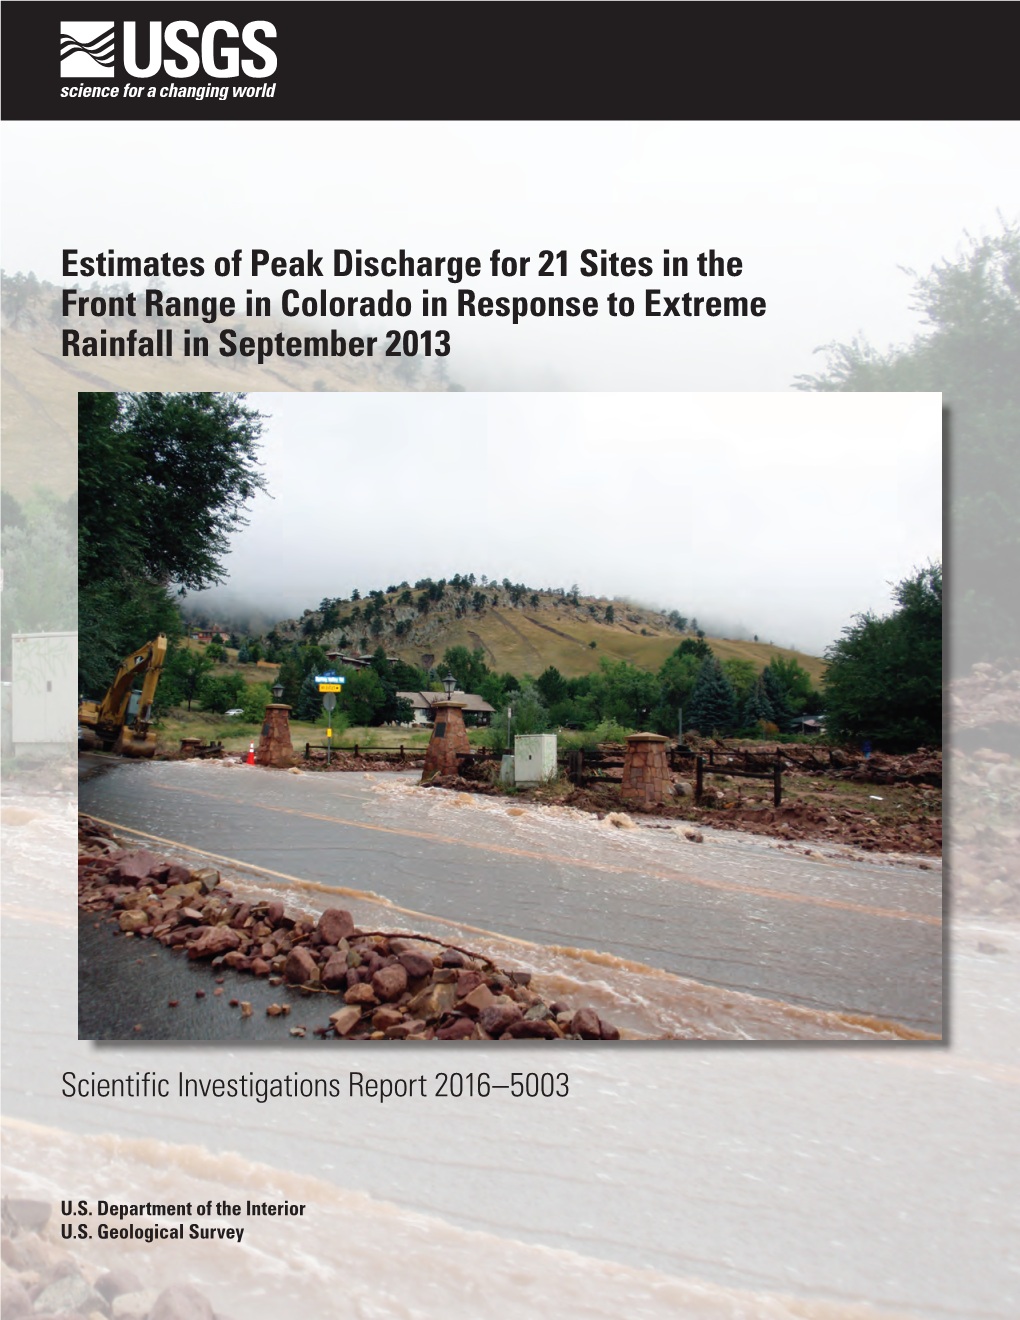 Estimates of Peak Flood Discharge for 21 Sites in the Front Range in Colorado in Response to Extreme Rainfall in September 2013: U.S